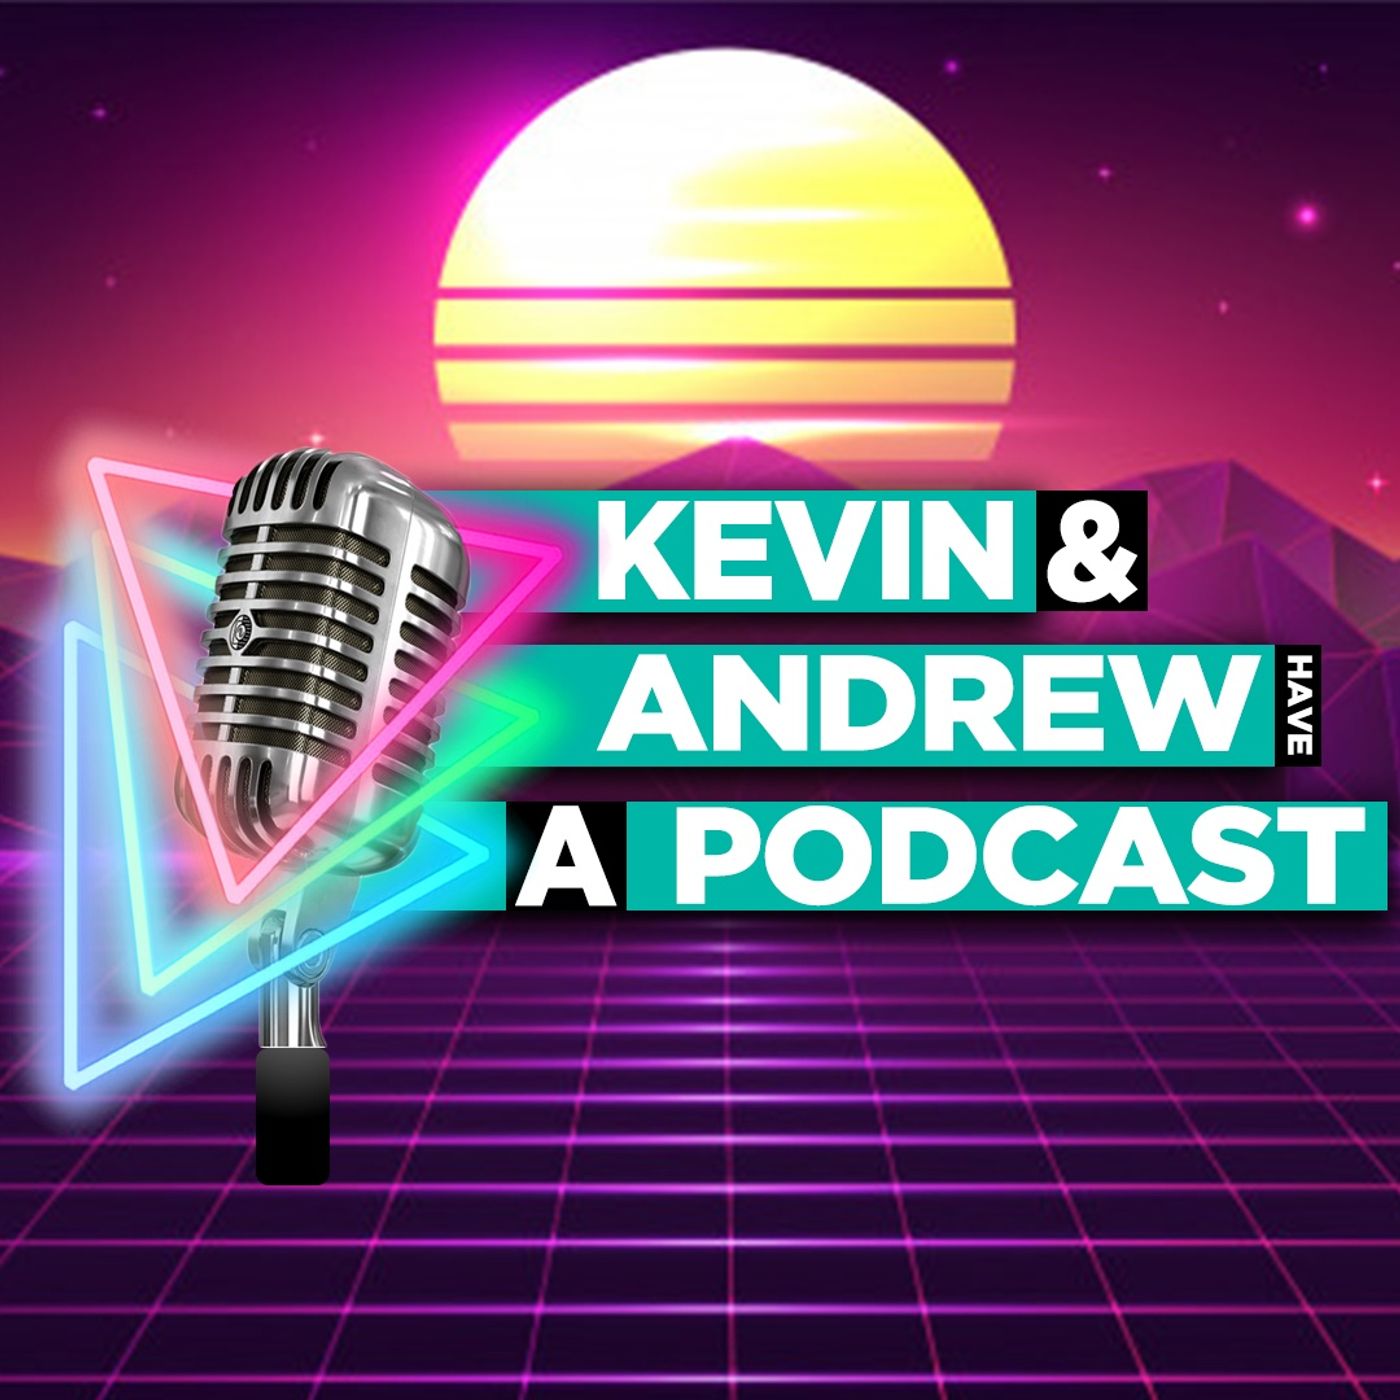 Kevin & Andrew Have a Podcast